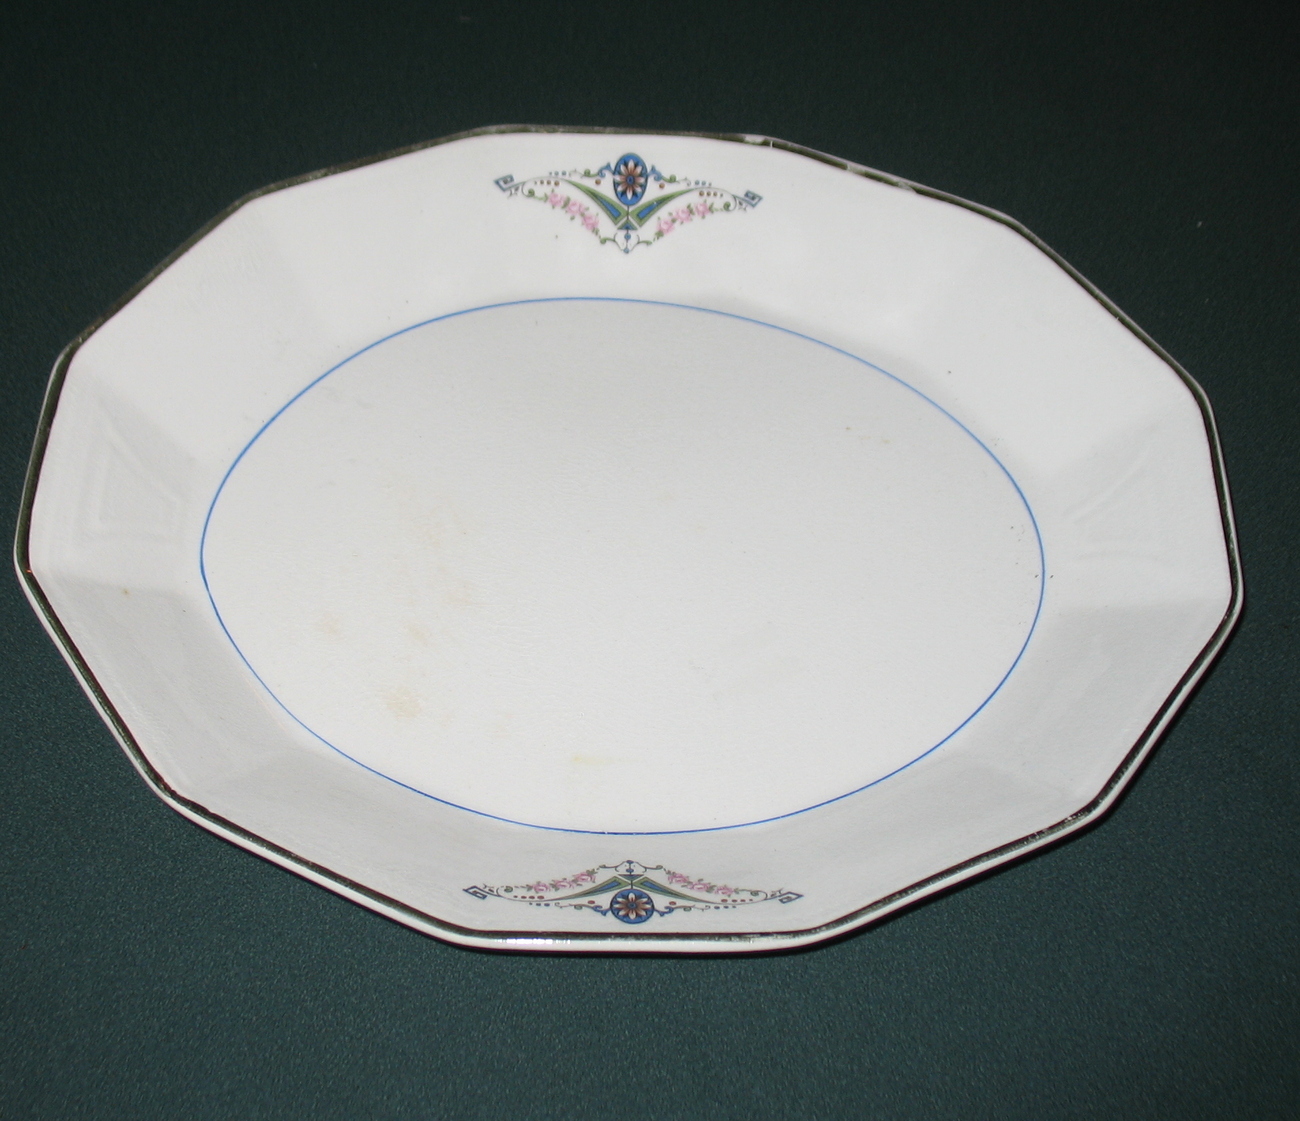 Primary image for Gorgeous VintageUnmarked Platter